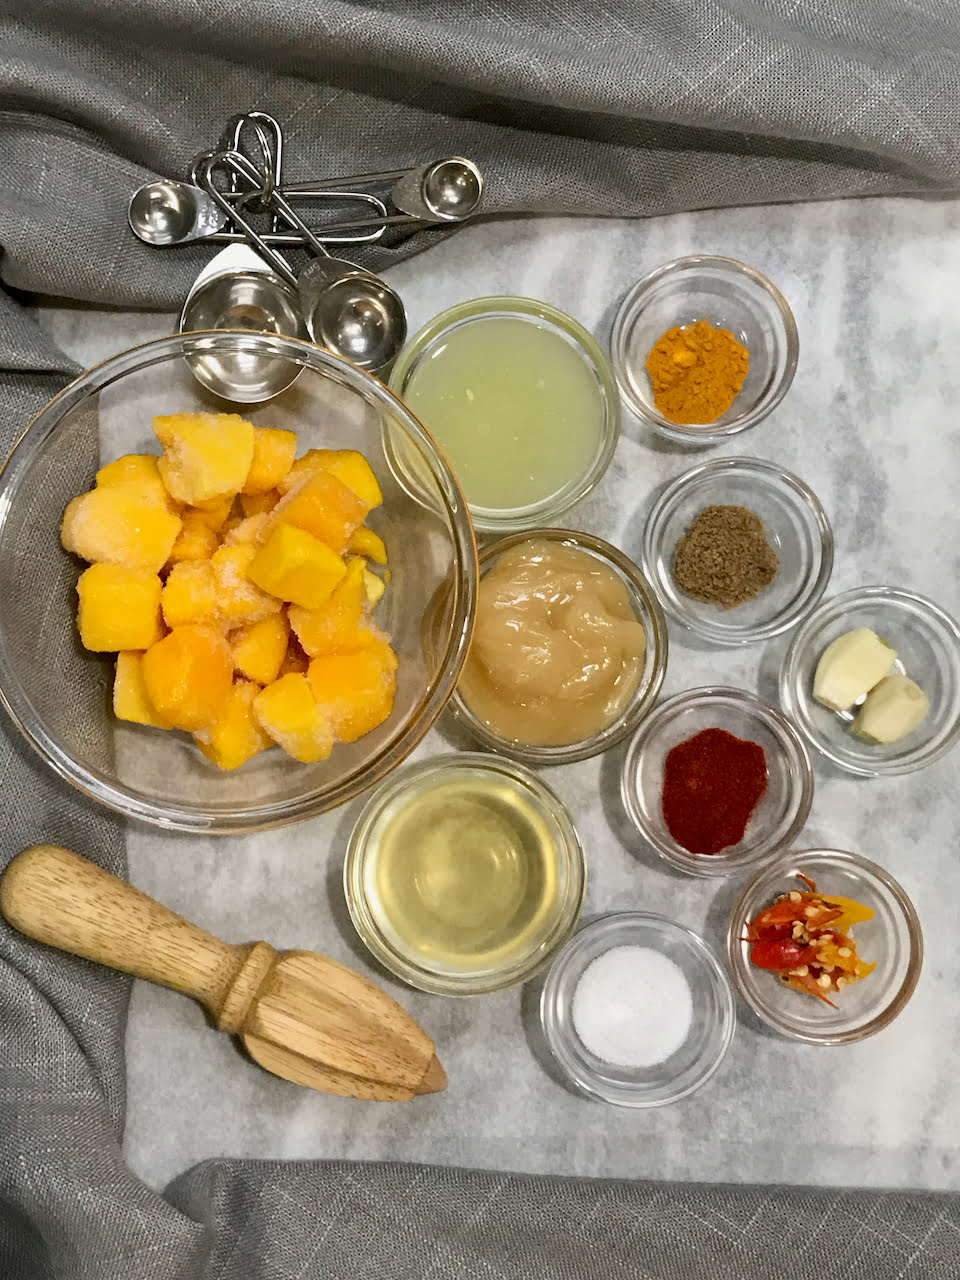 Sweet and Sour Mango Sauce Ingredients